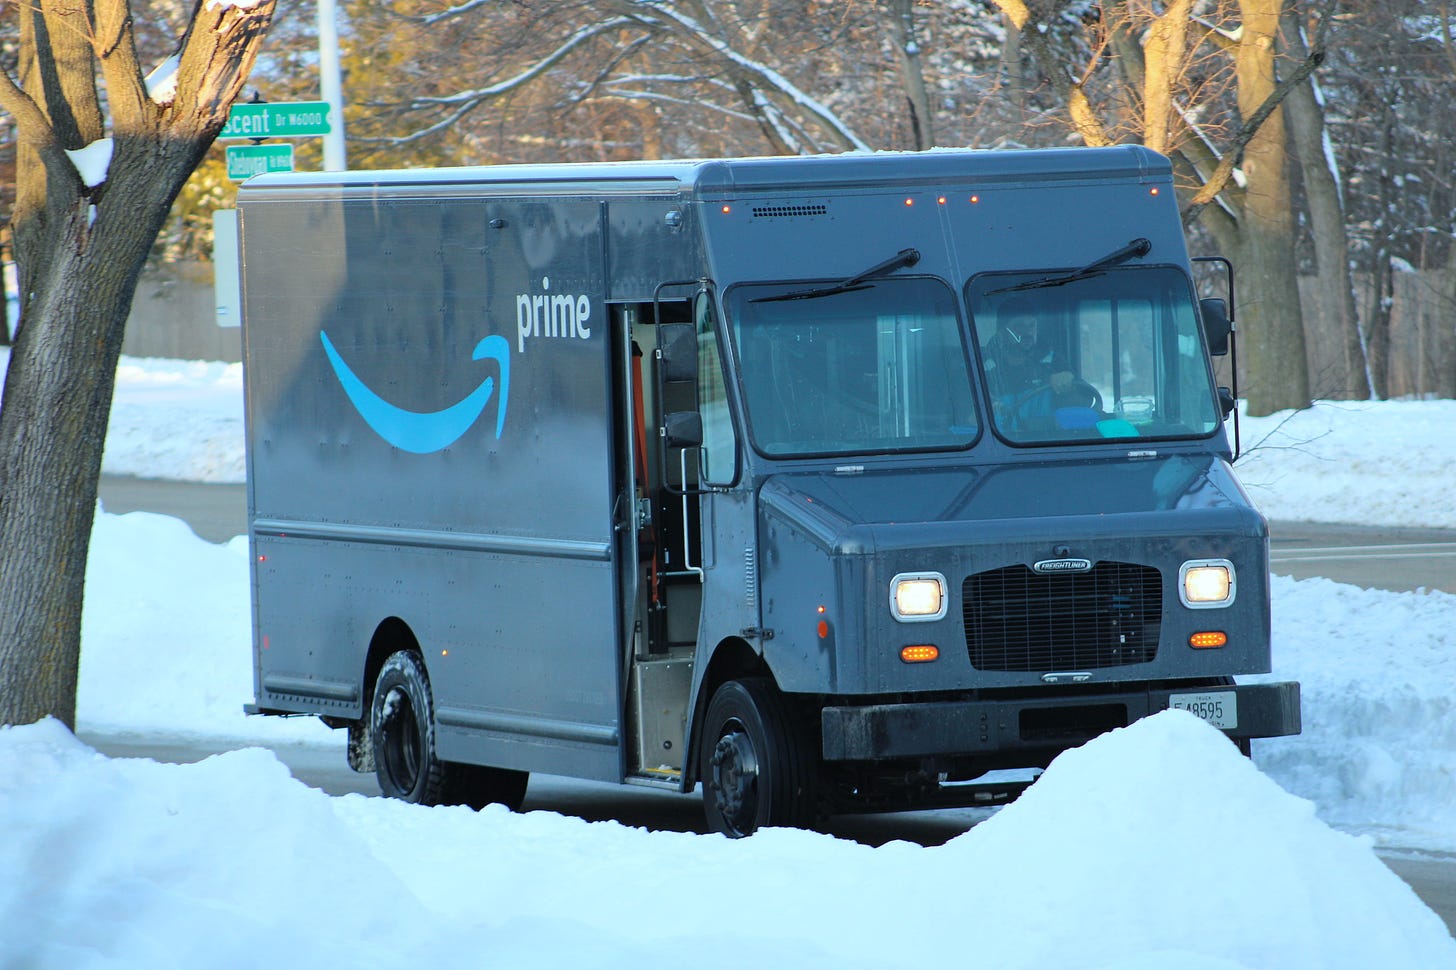 Amazon delivery truck